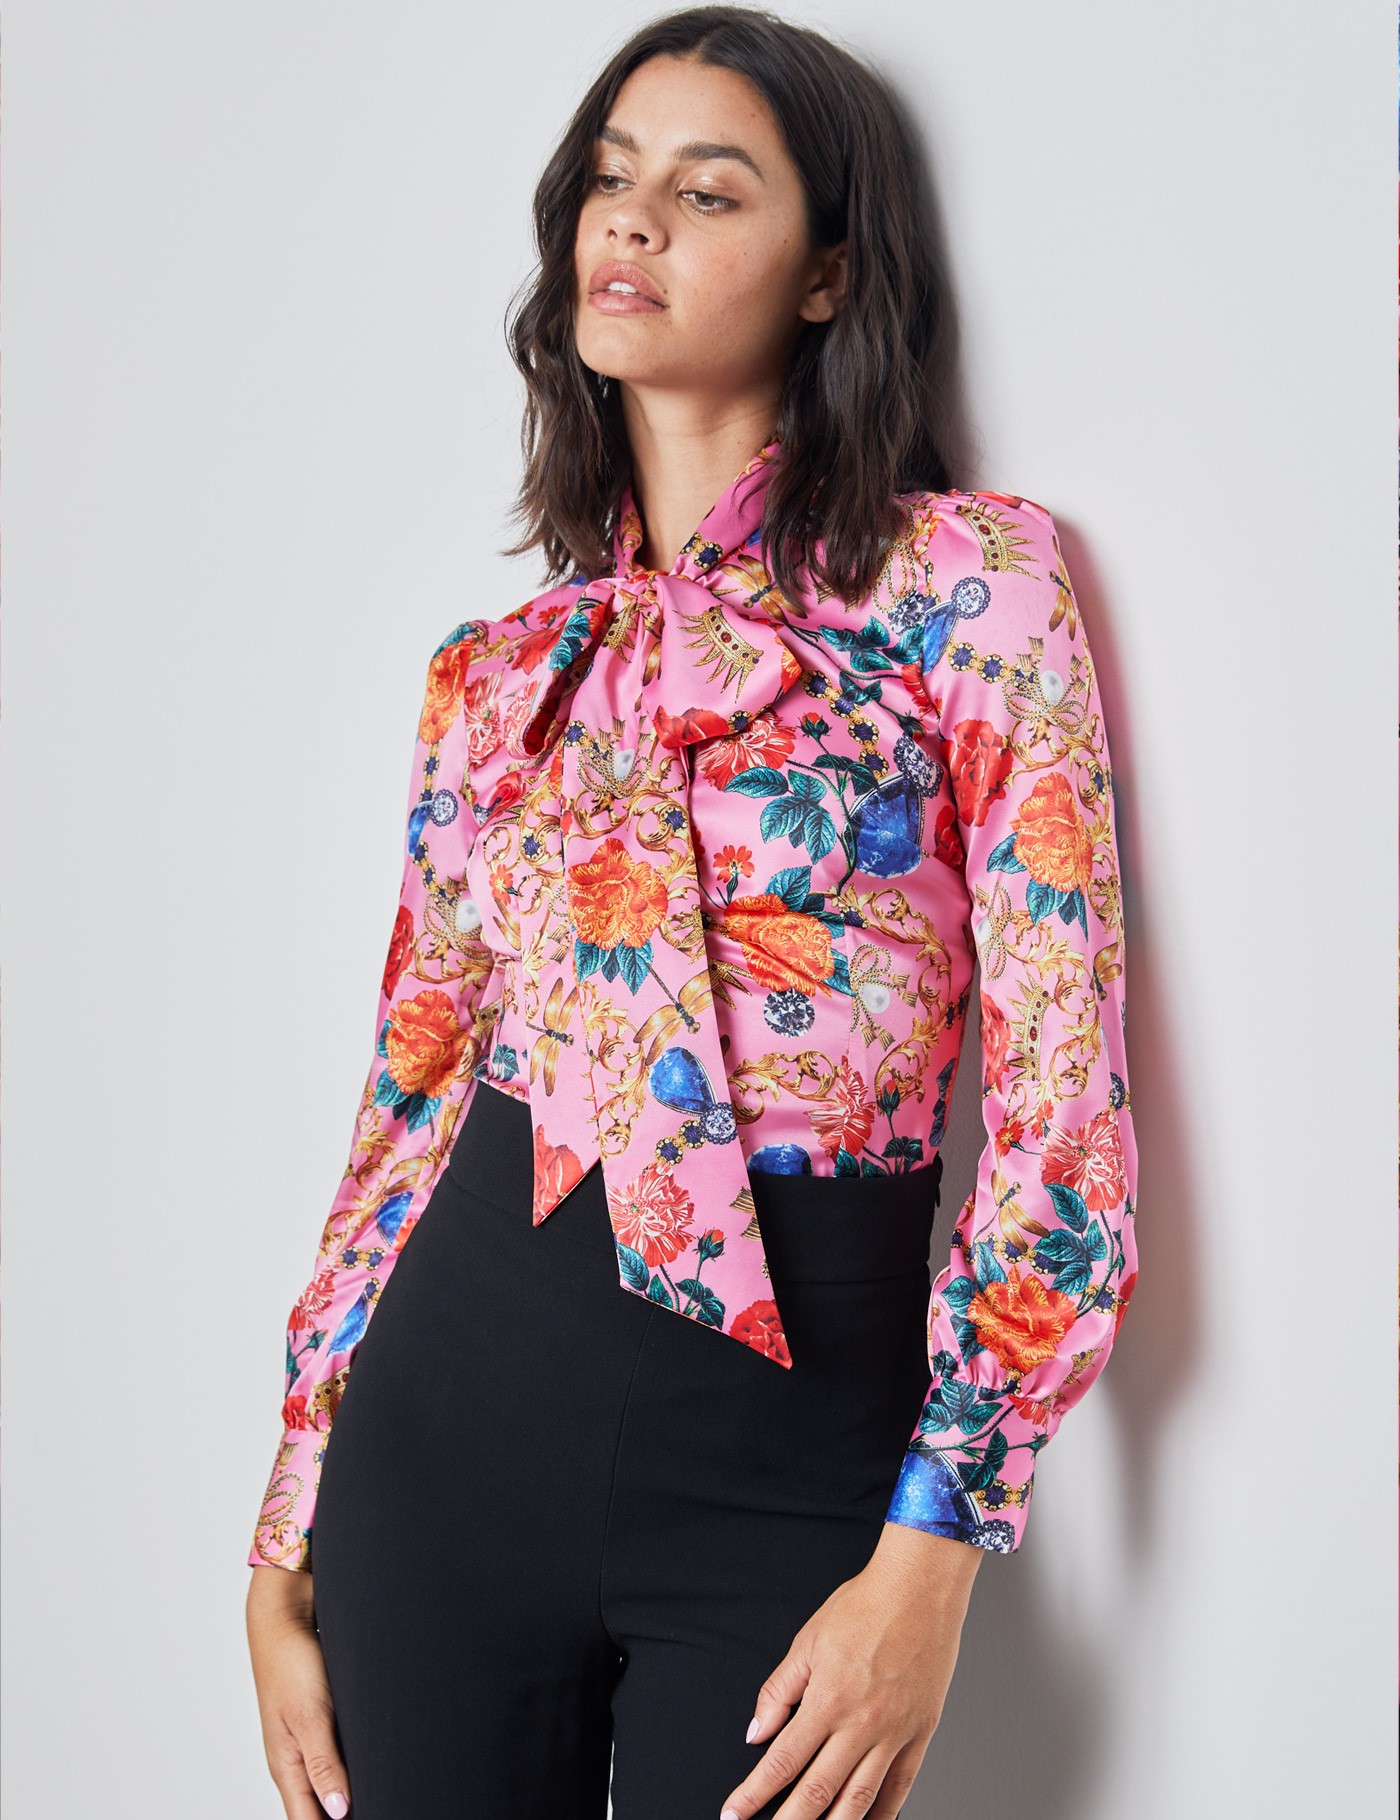 Floral Print Womens Satin Blouse With Single Cuff In Pink And Gold Hawes And Curtis Uk